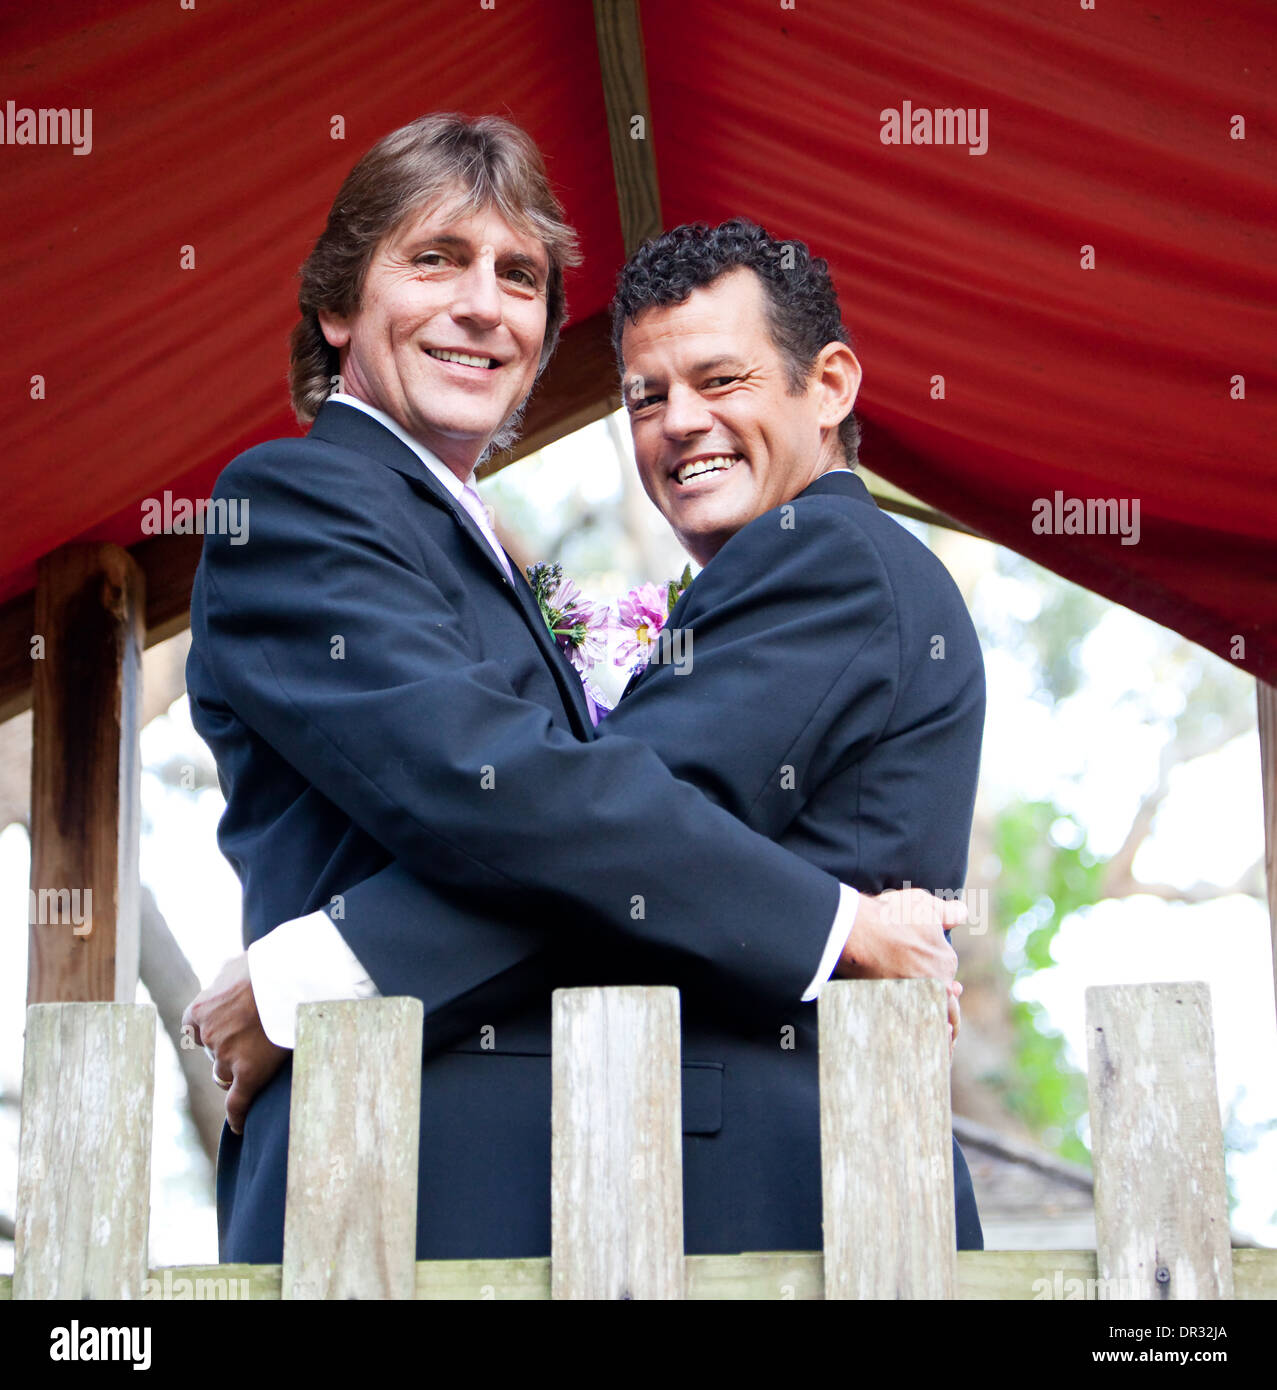 Portrait of a newly married gay couple embracing on a playground in the park.  Stock Photo